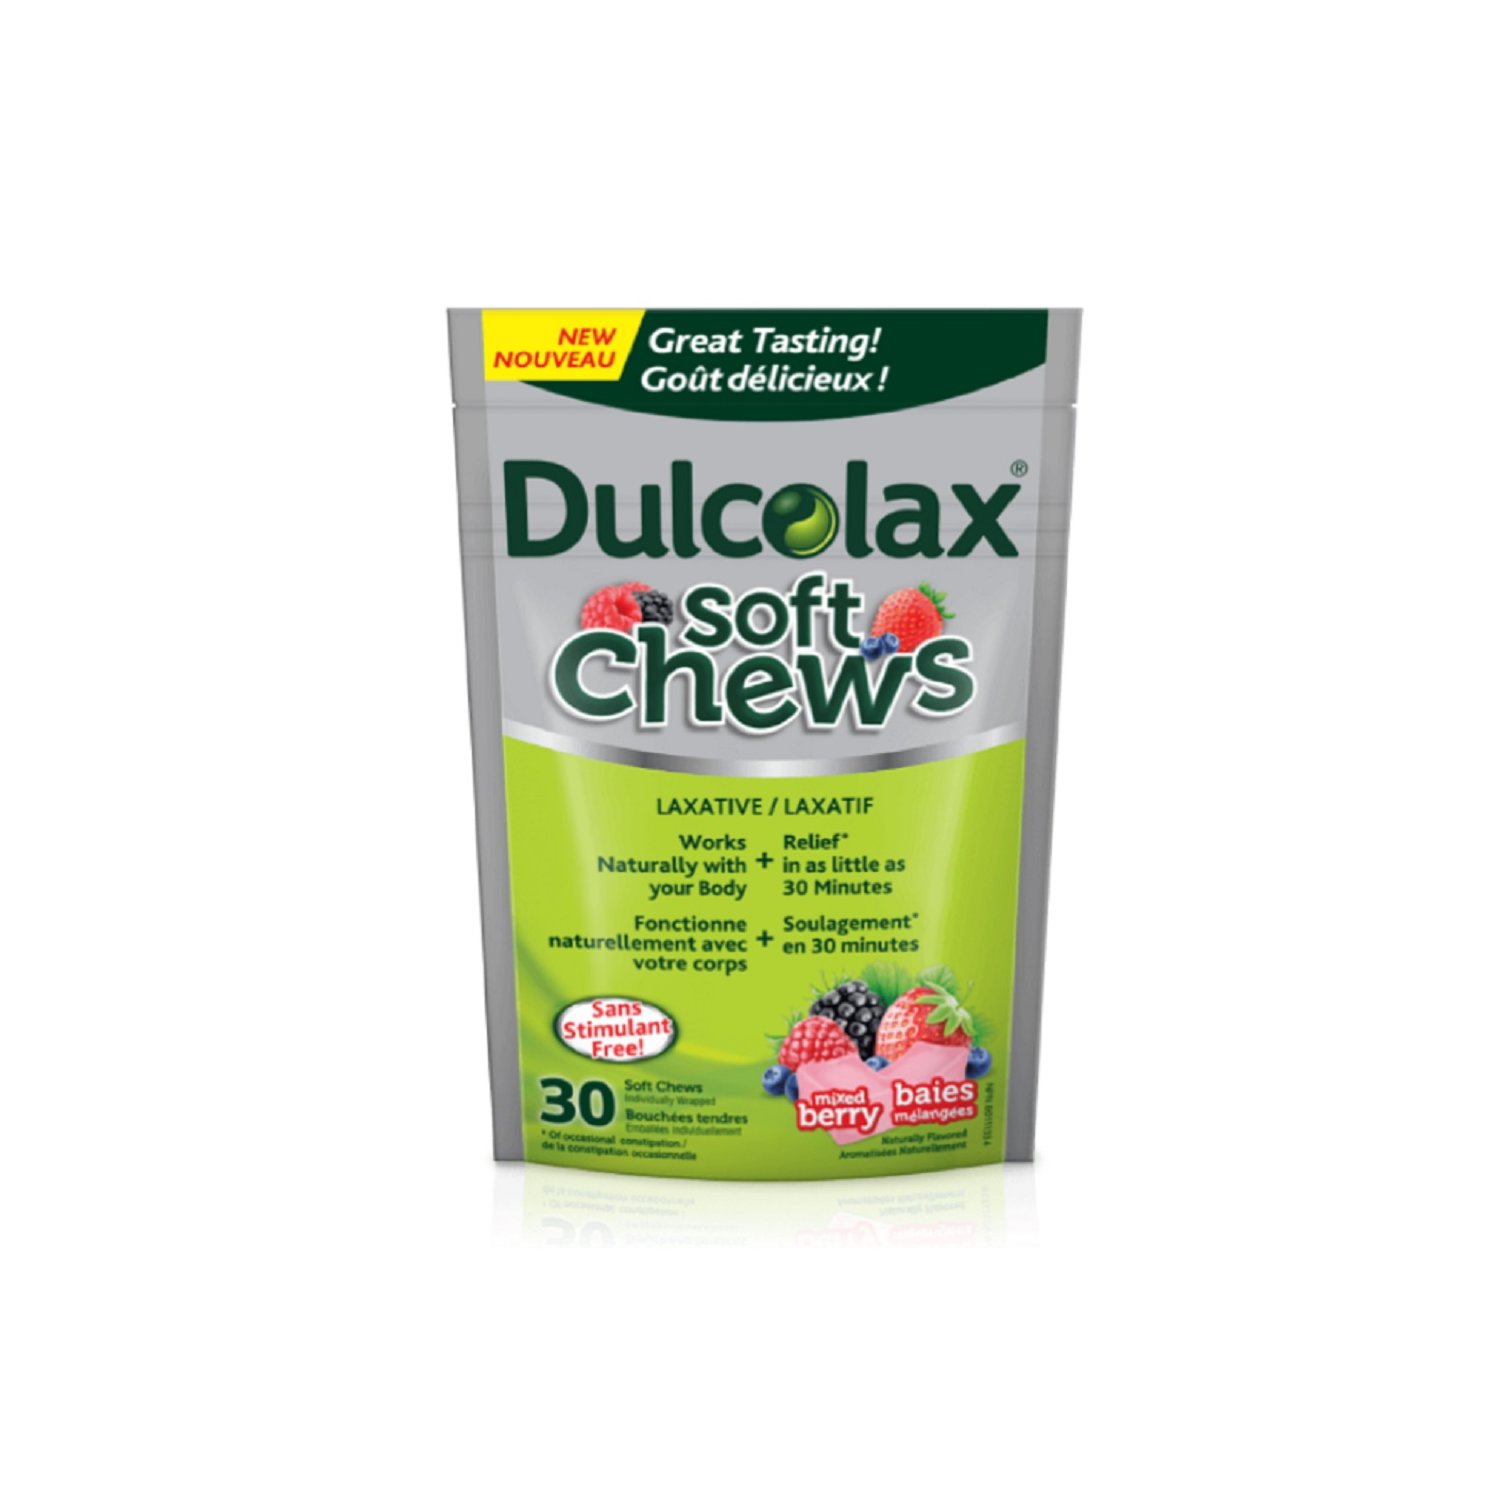 Dulcolax - Constipation occasionnelle